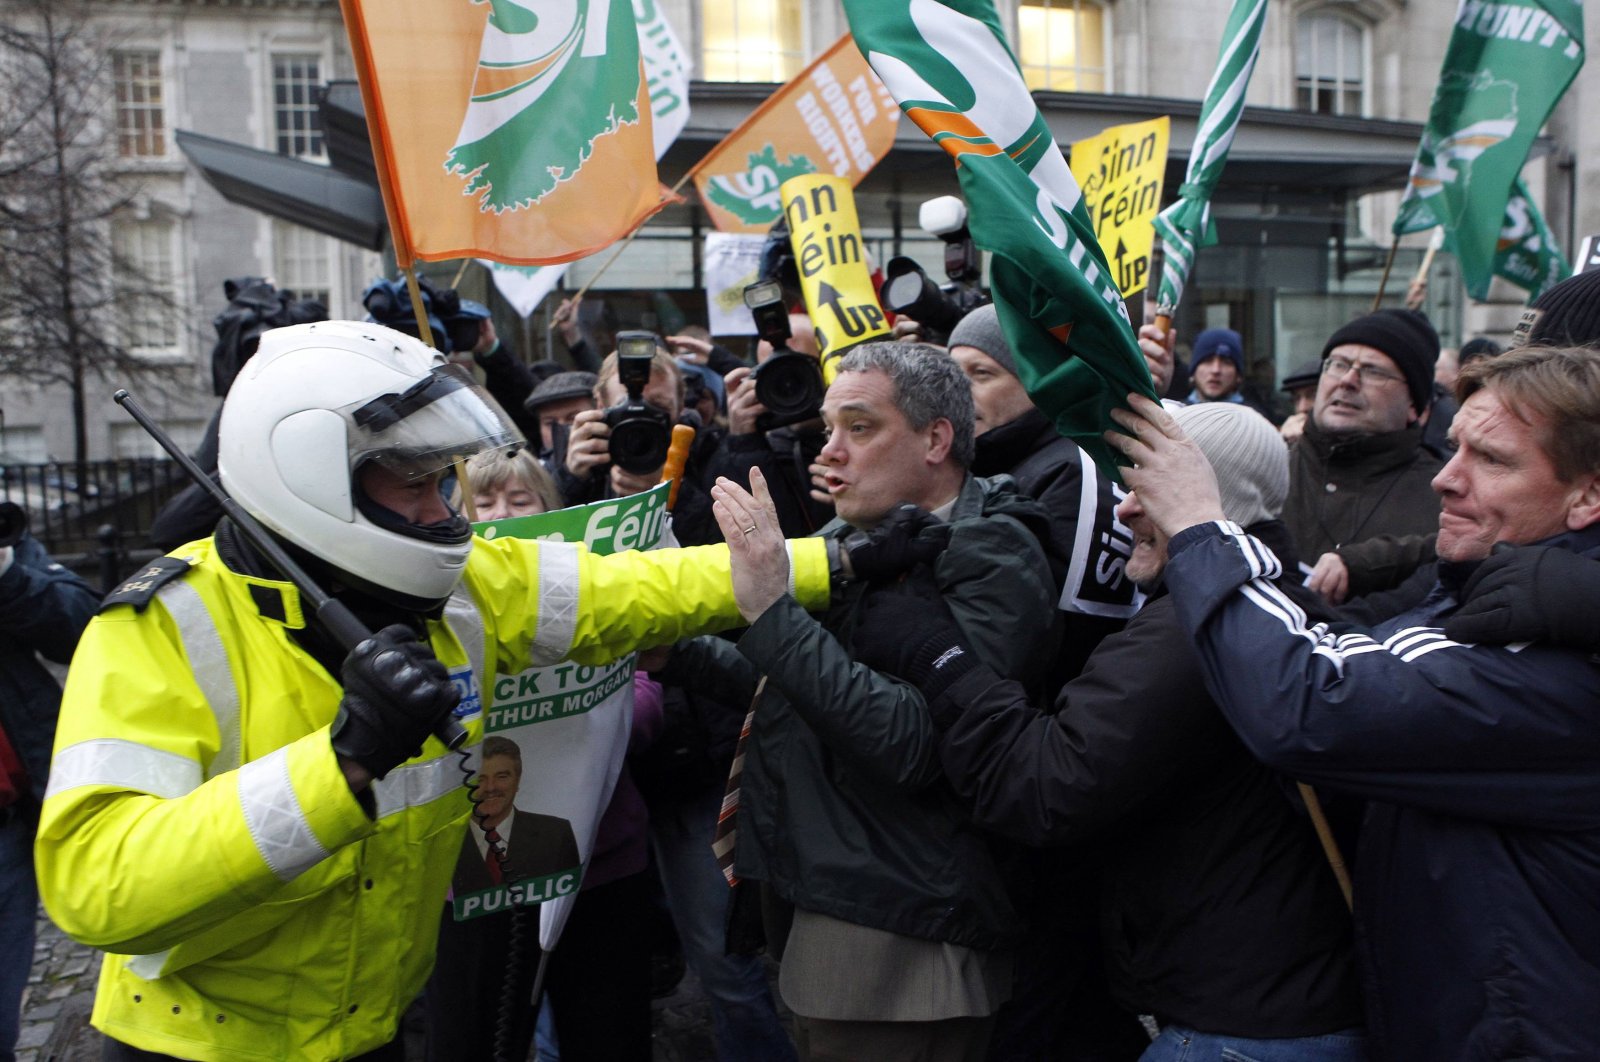 Sinn Fein demonstrators clash with police officers after breaking through the gates of Government Buildings, in Dublin, Ireland, November 22, 2010. (Reuters Photo)